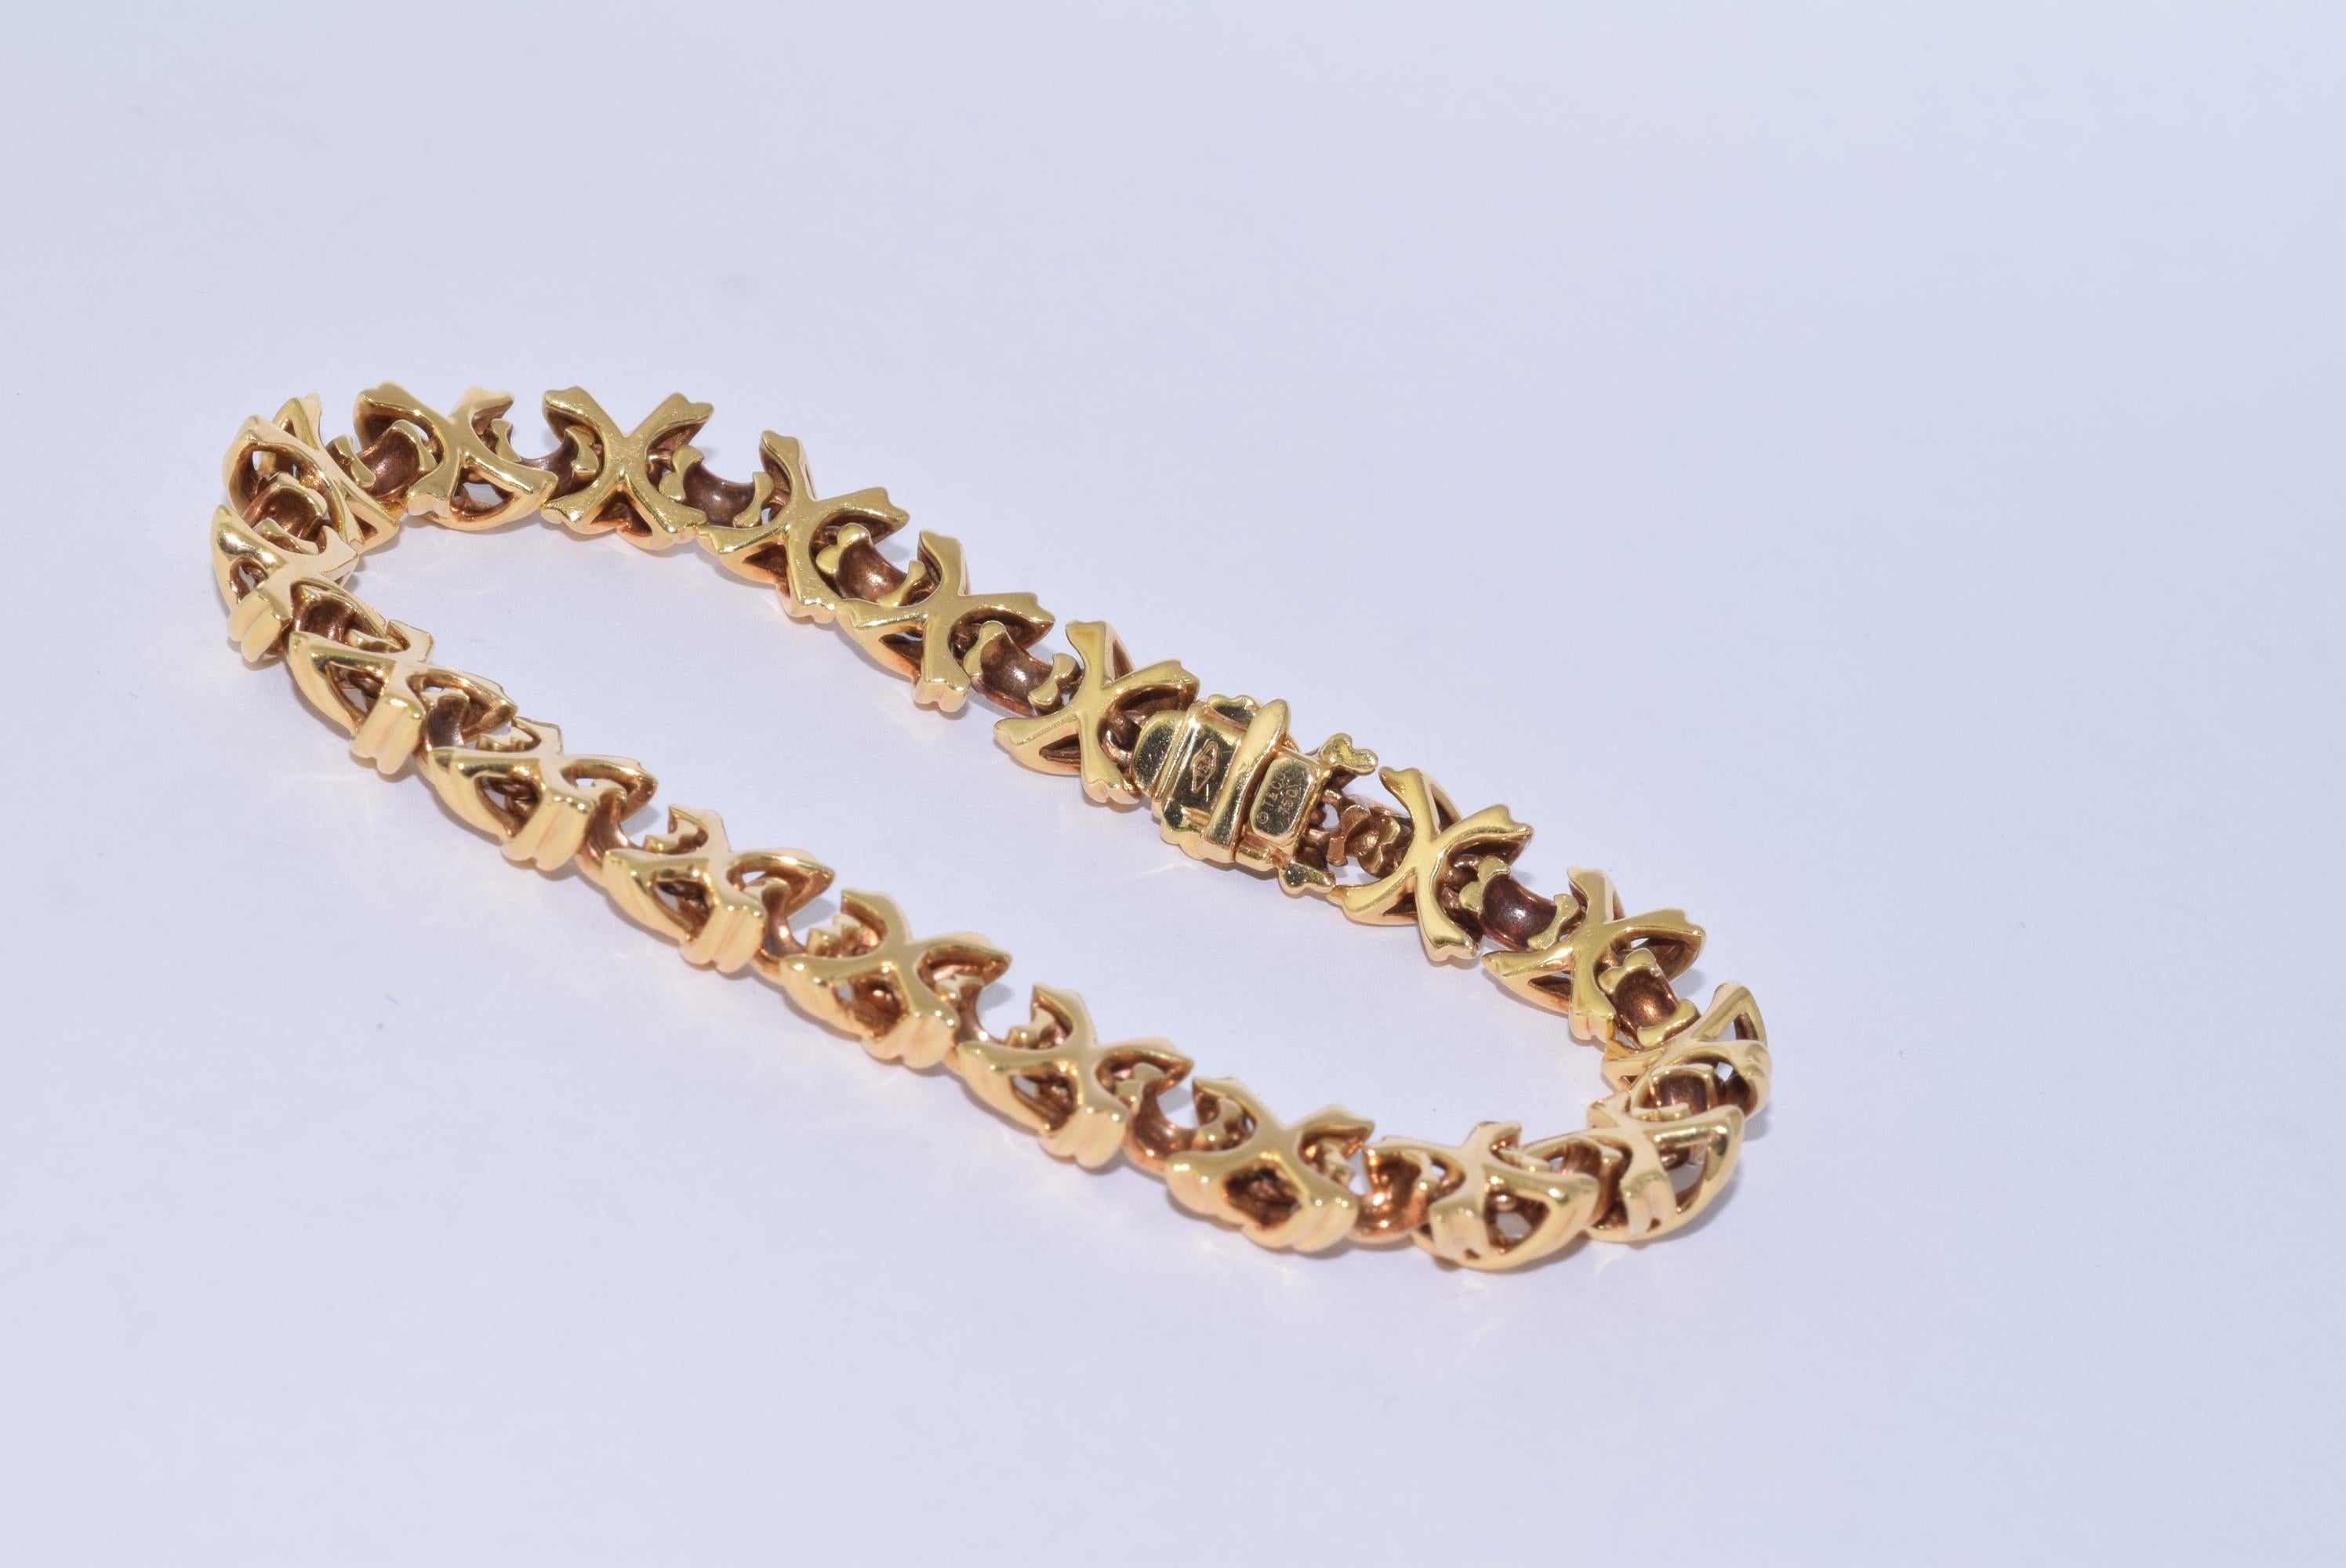 18 Karat Yellow Gold Signature X Bracelet by Tiffany & Co.

A classic signature X link bracelet in 18 karat yellow gold is stamped T & Co. 8mm width, 7 inch length. 28.2 grams.